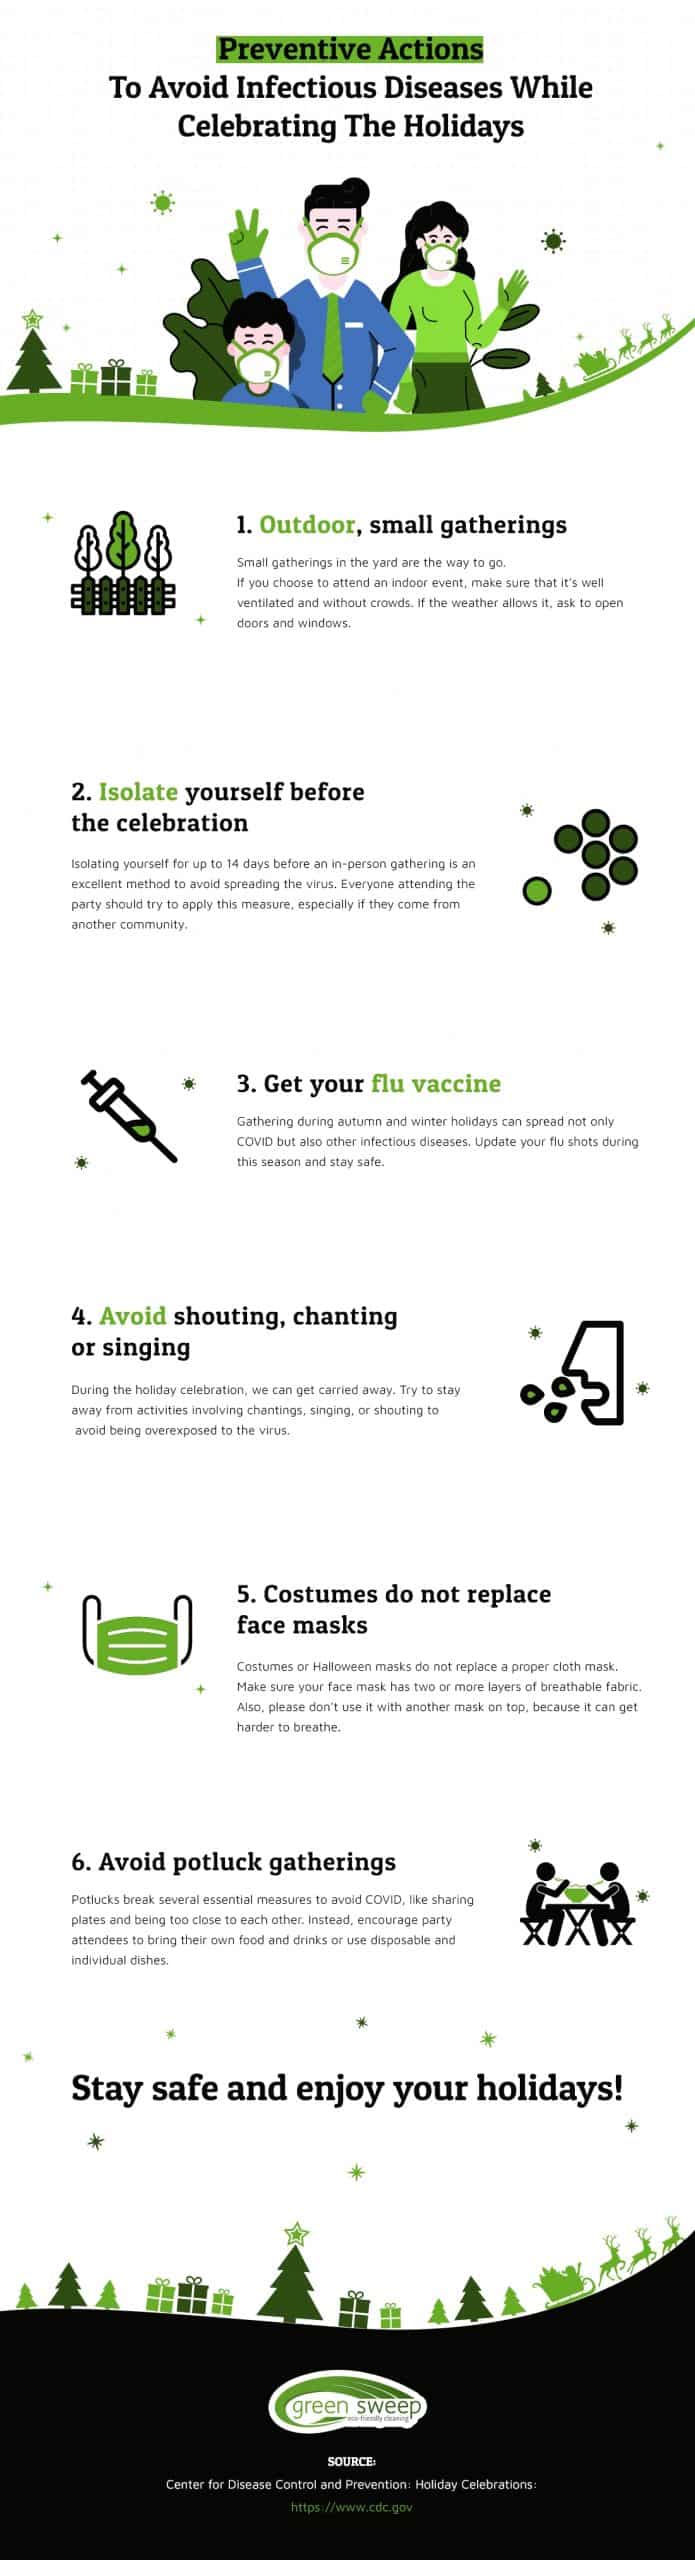 Infographic to avoid Infectious diseases